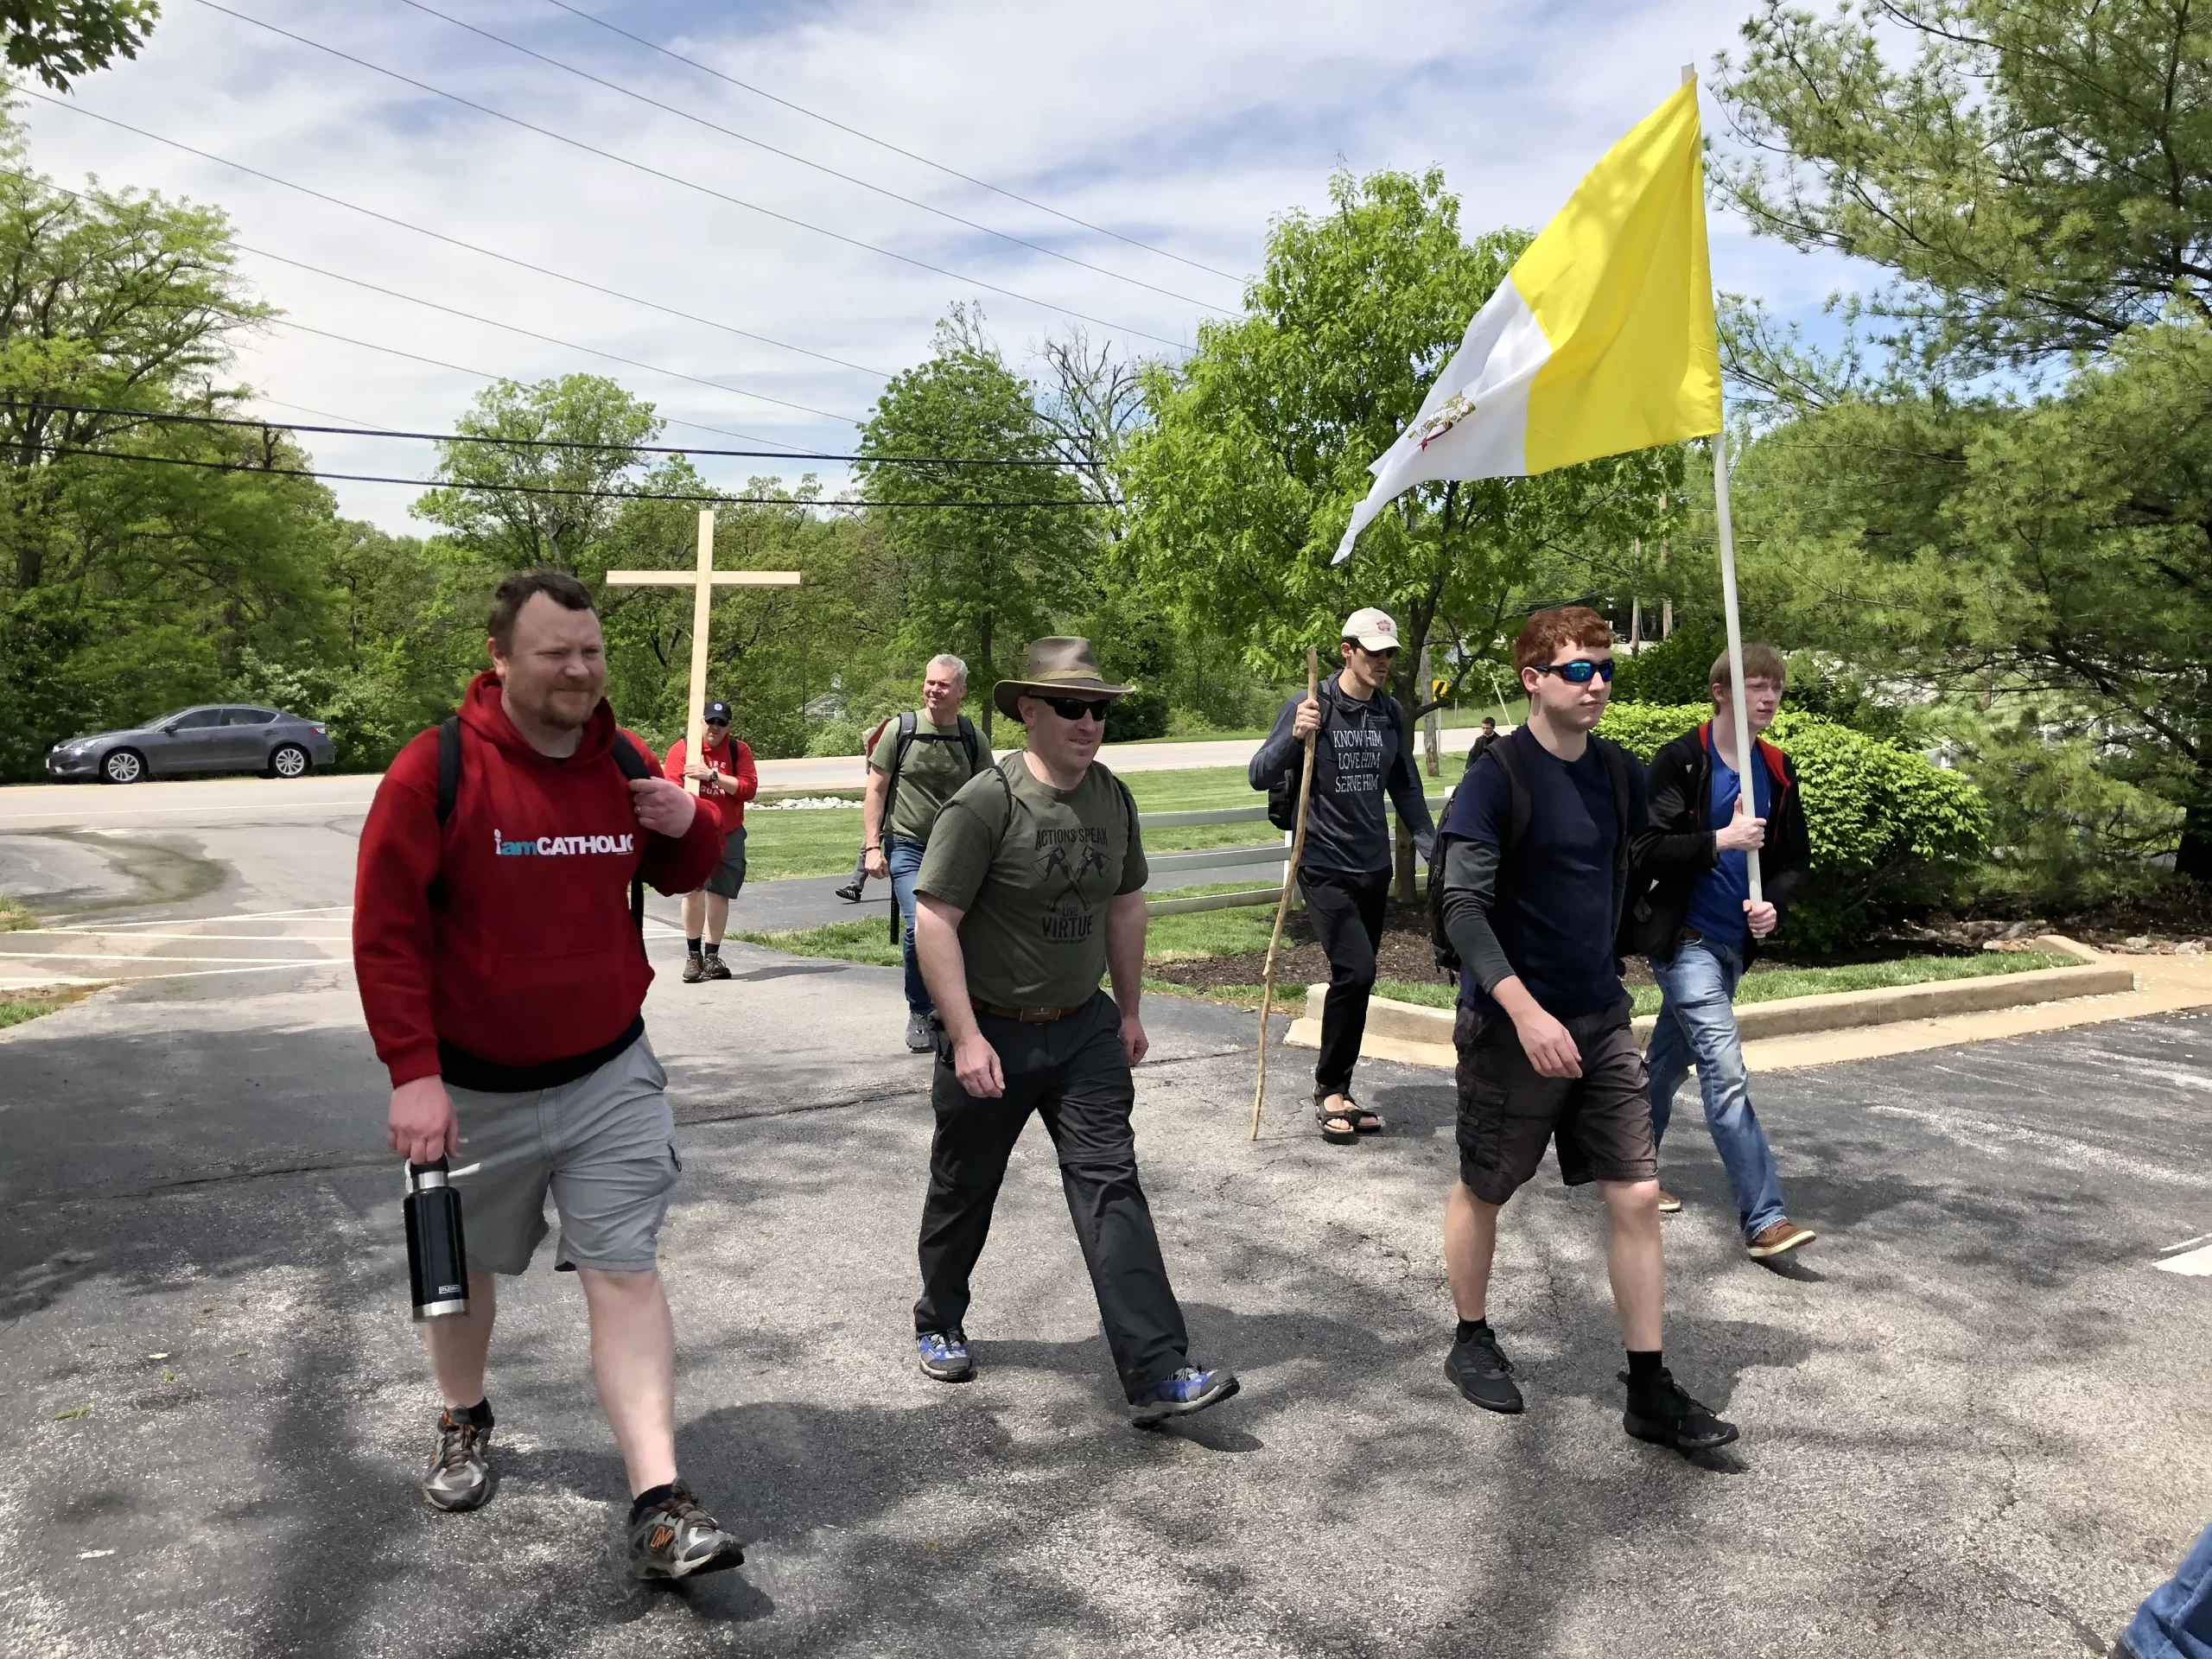 Men walk through St. Louis during the Joseph Challenge Pilgrimage in 2019 carrying a wooden cross and a Vatican flag. Credit: Jonah McKeown/CNA